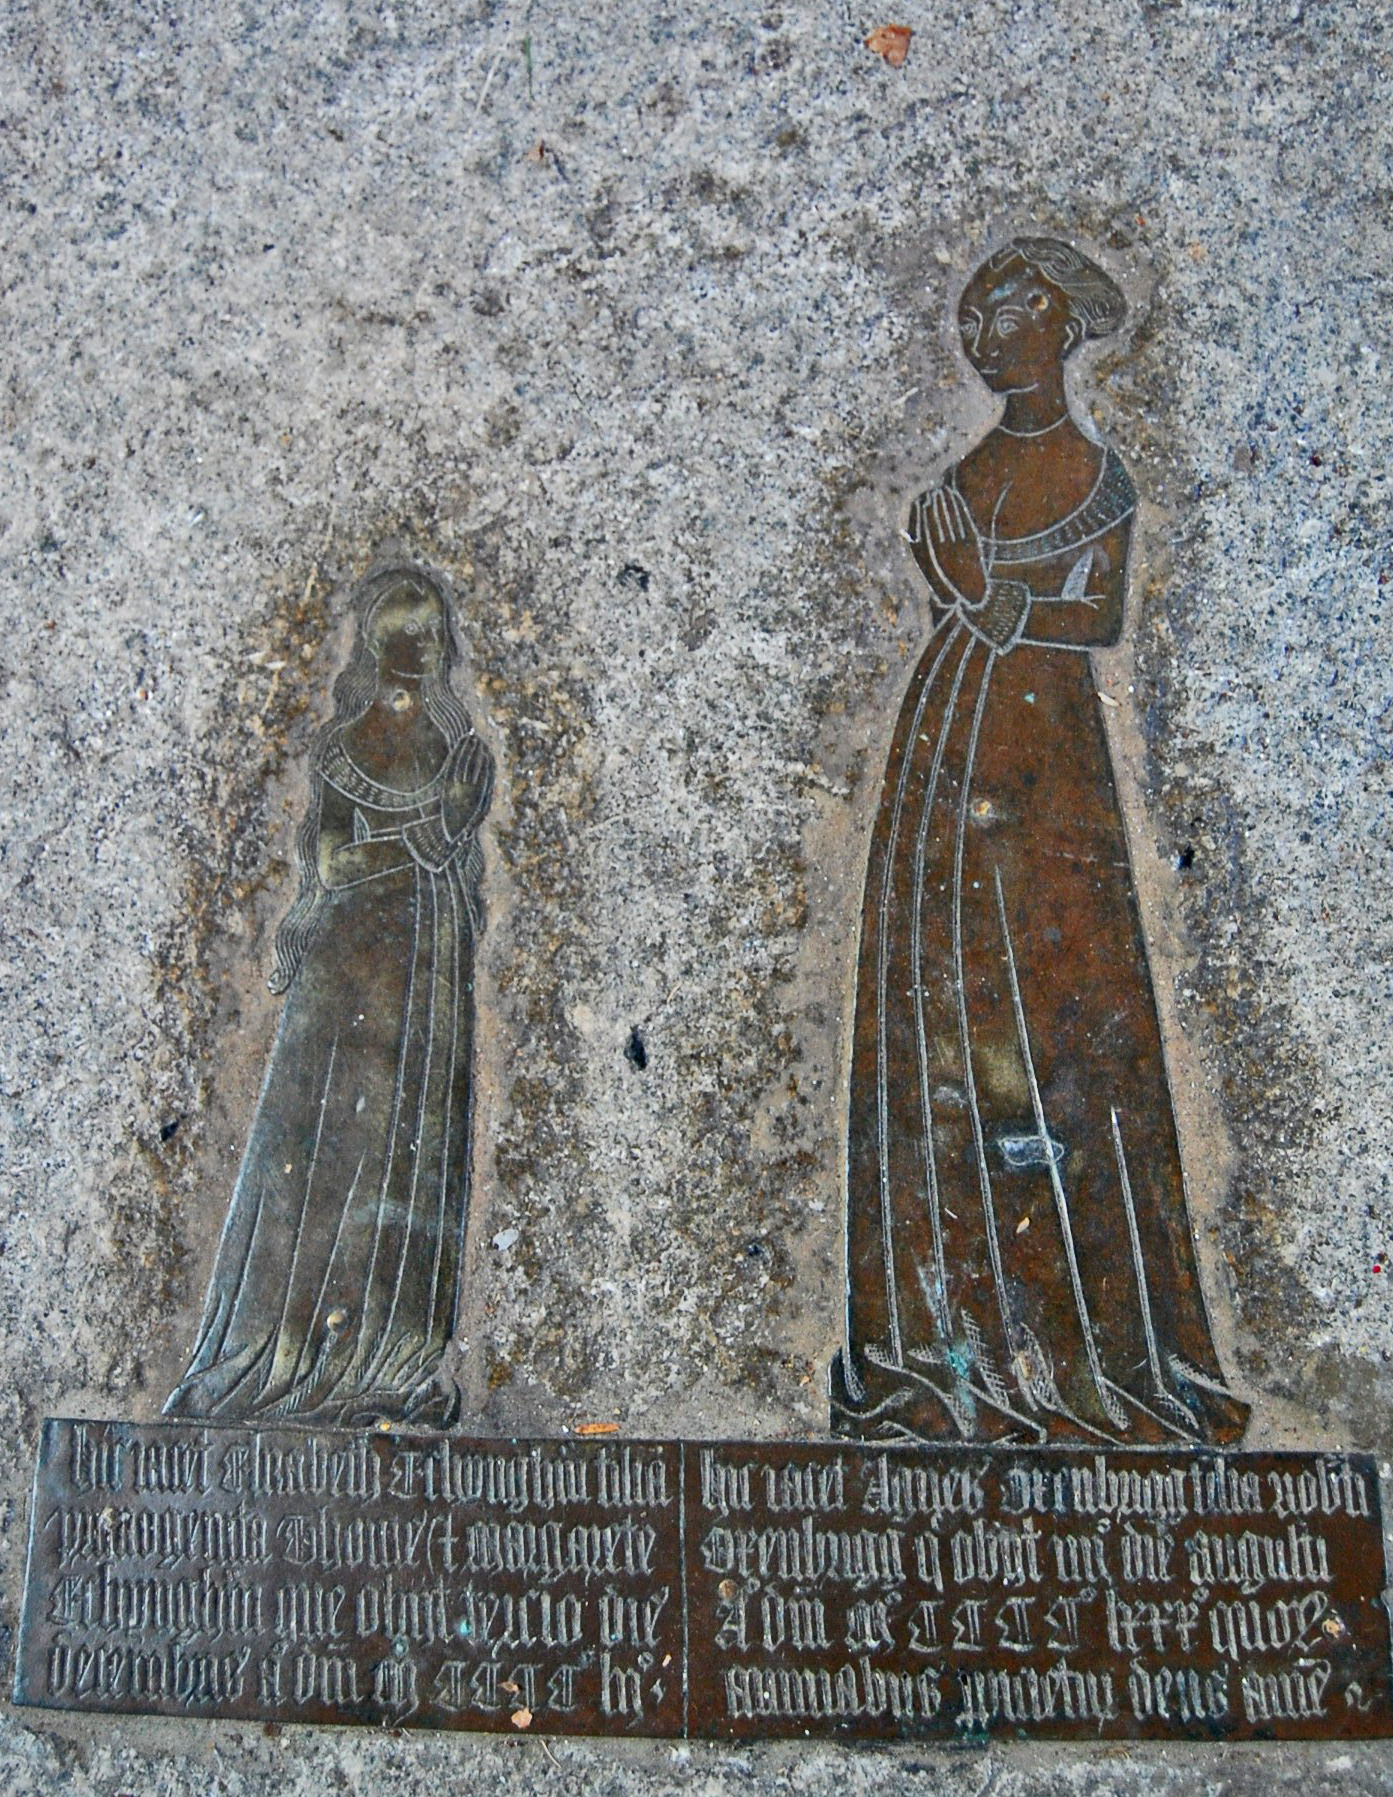 https://upload.wikimedia.org/wikipedia/commons/5/50/Brass_of_Elizabeth_Etchingham_and_Agnes_Oxenbrigg%2C_Etchingham_church.jpg